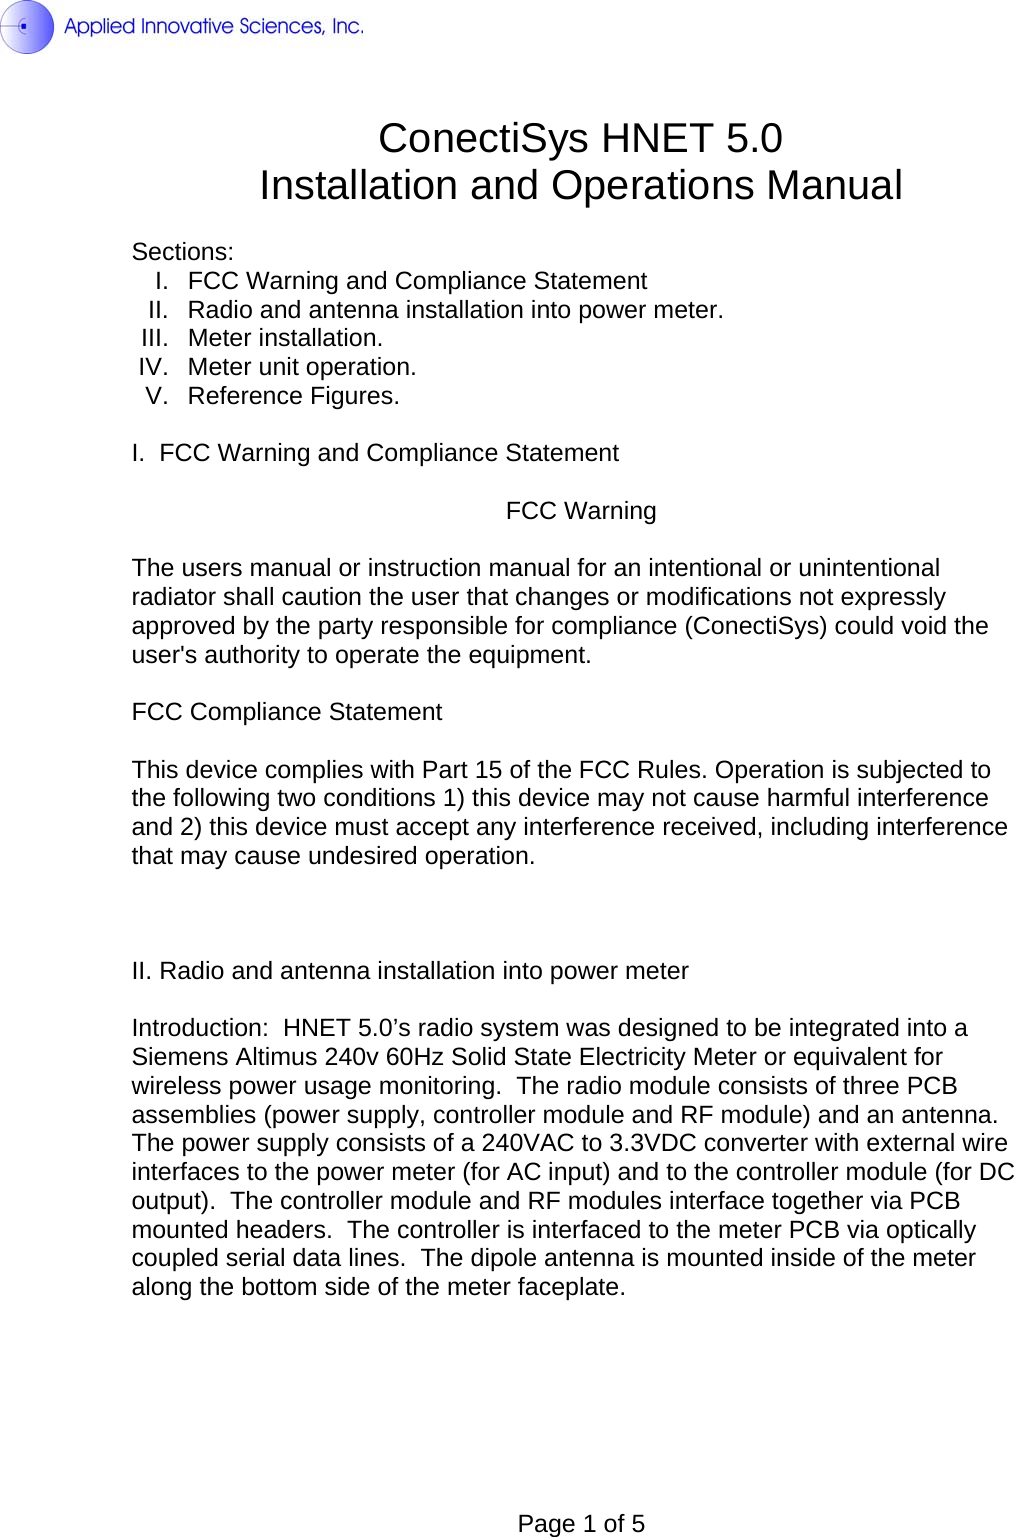  ConectiSys HNET 5.0 Installation and Operations Manual  Sections: I.  FCC Warning and Compliance Statement II.  Radio and antenna installation into power meter. III. Meter installation. IV. Meter unit operation. V. Reference Figures.  I.  FCC Warning and Compliance Statement  FCC Warning  The users manual or instruction manual for an intentional or unintentional radiator shall caution the user that changes or modifications not expressly approved by the party responsible for compliance (ConectiSys) could void the user&apos;s authority to operate the equipment.  FCC Compliance Statement  This device complies with Part 15 of the FCC Rules. Operation is subjected to the following two conditions 1) this device may not cause harmful interference and 2) this device must accept any interference received, including interference that may cause undesired operation.    II. Radio and antenna installation into power meter  Introduction:  HNET 5.0’s radio system was designed to be integrated into a Siemens Altimus 240v 60Hz Solid State Electricity Meter or equivalent for wireless power usage monitoring.  The radio module consists of three PCB assemblies (power supply, controller module and RF module) and an antenna.  The power supply consists of a 240VAC to 3.3VDC converter with external wire interfaces to the power meter (for AC input) and to the controller module (for DC output).  The controller module and RF modules interface together via PCB mounted headers.  The controller is interfaced to the meter PCB via optically coupled serial data lines.  The dipole antenna is mounted inside of the meter along the bottom side of the meter faceplate.       Page 1 of 5 